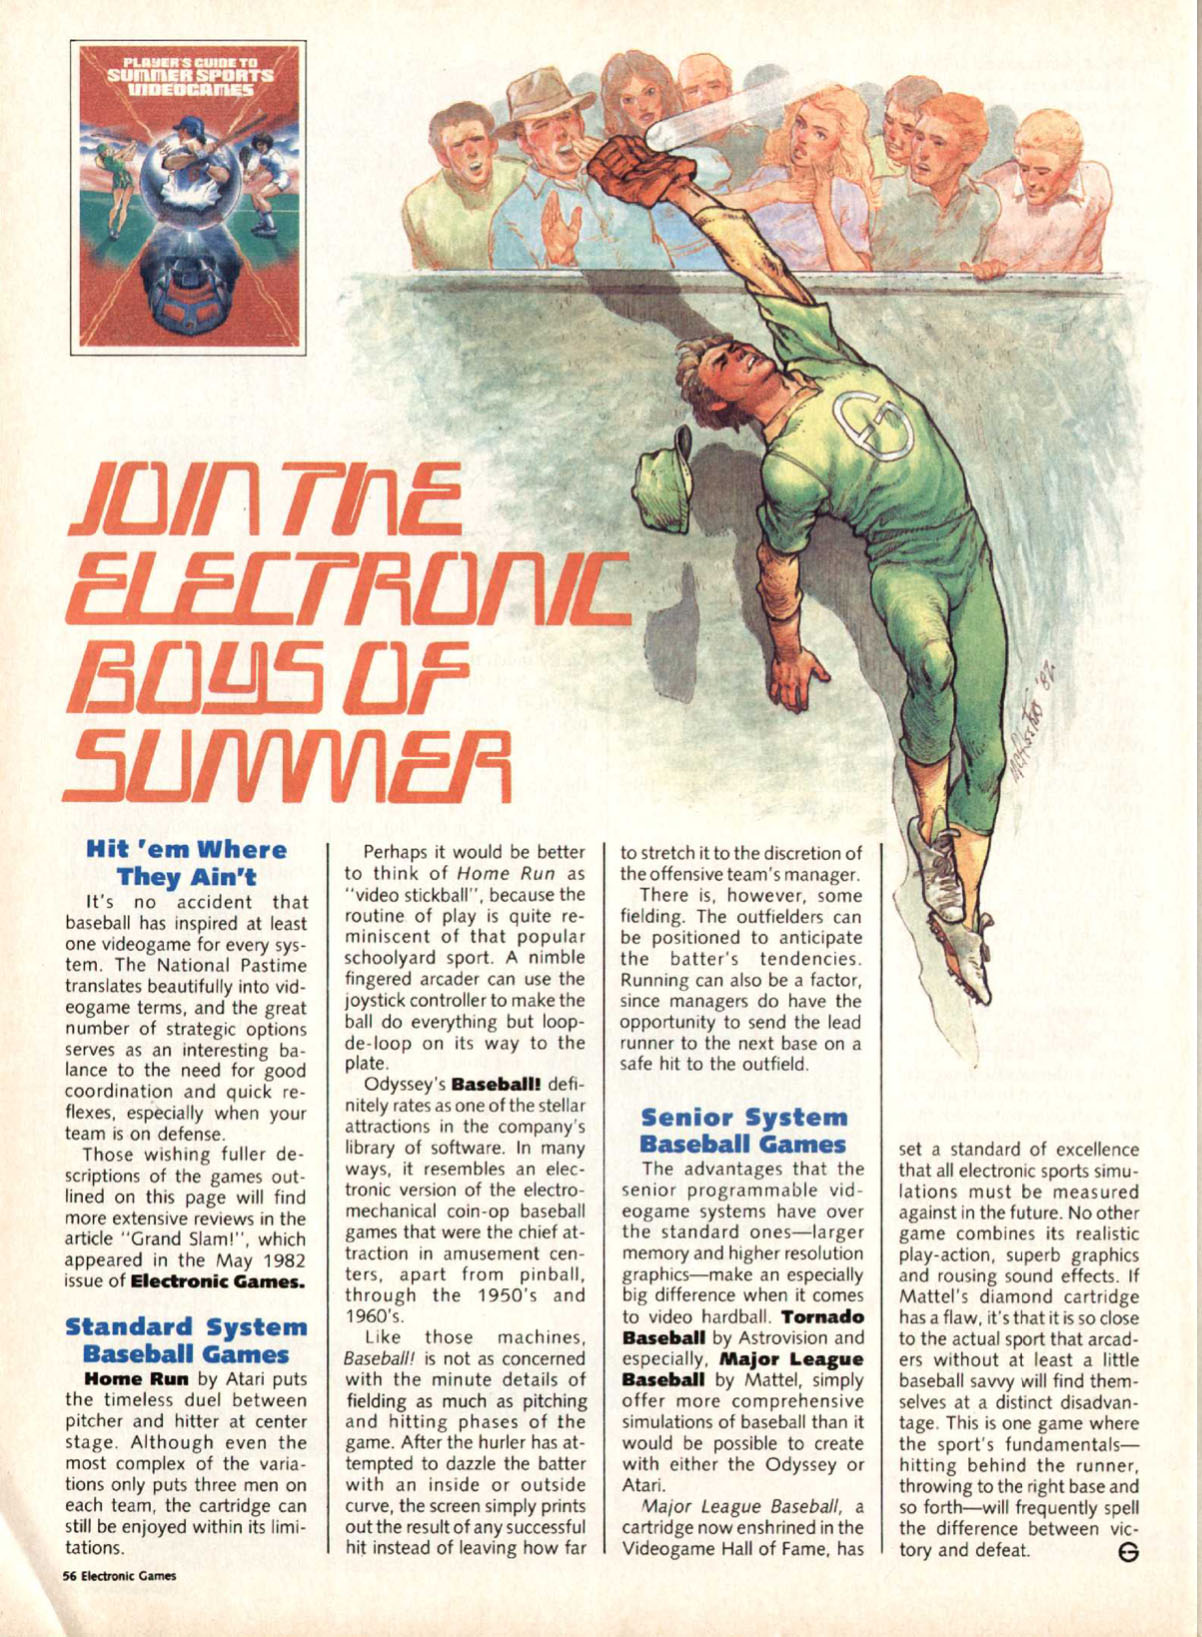 Join the Electronic Boys of Summer, Electronic Games July 1982 page 56